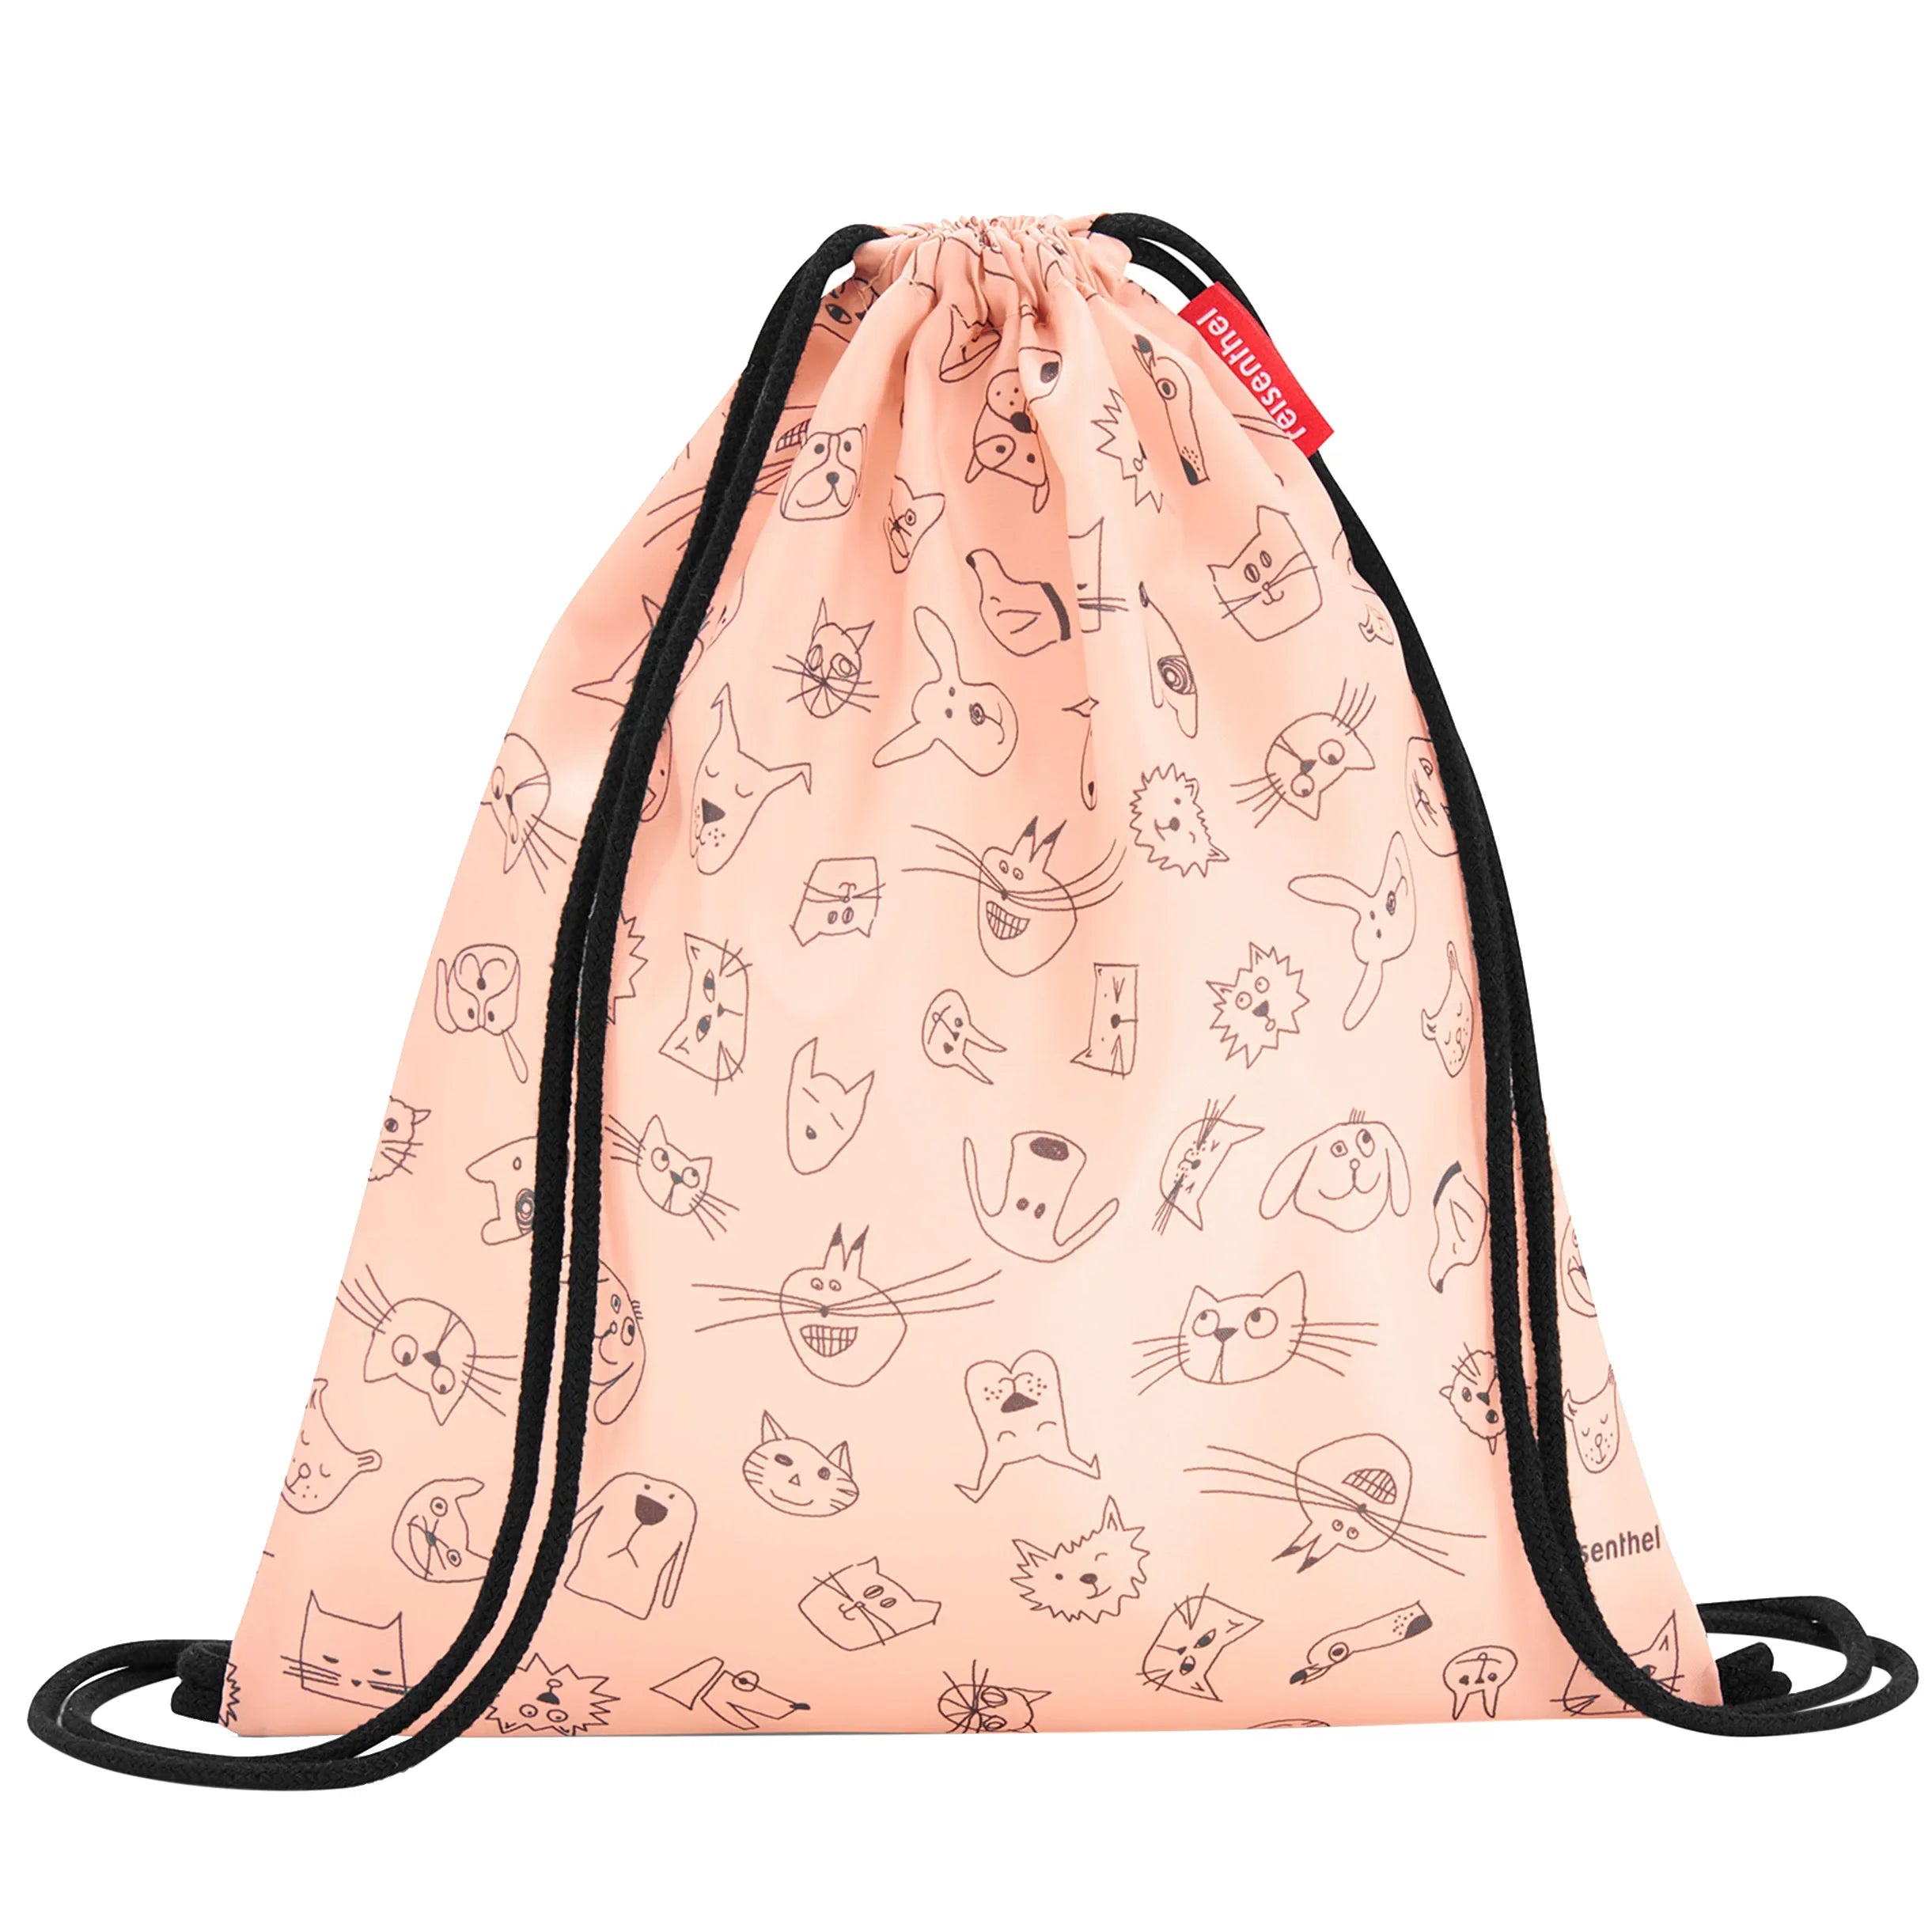 Reisenthel Kids Mysack sports bag 34 cm - cats and dogs rose